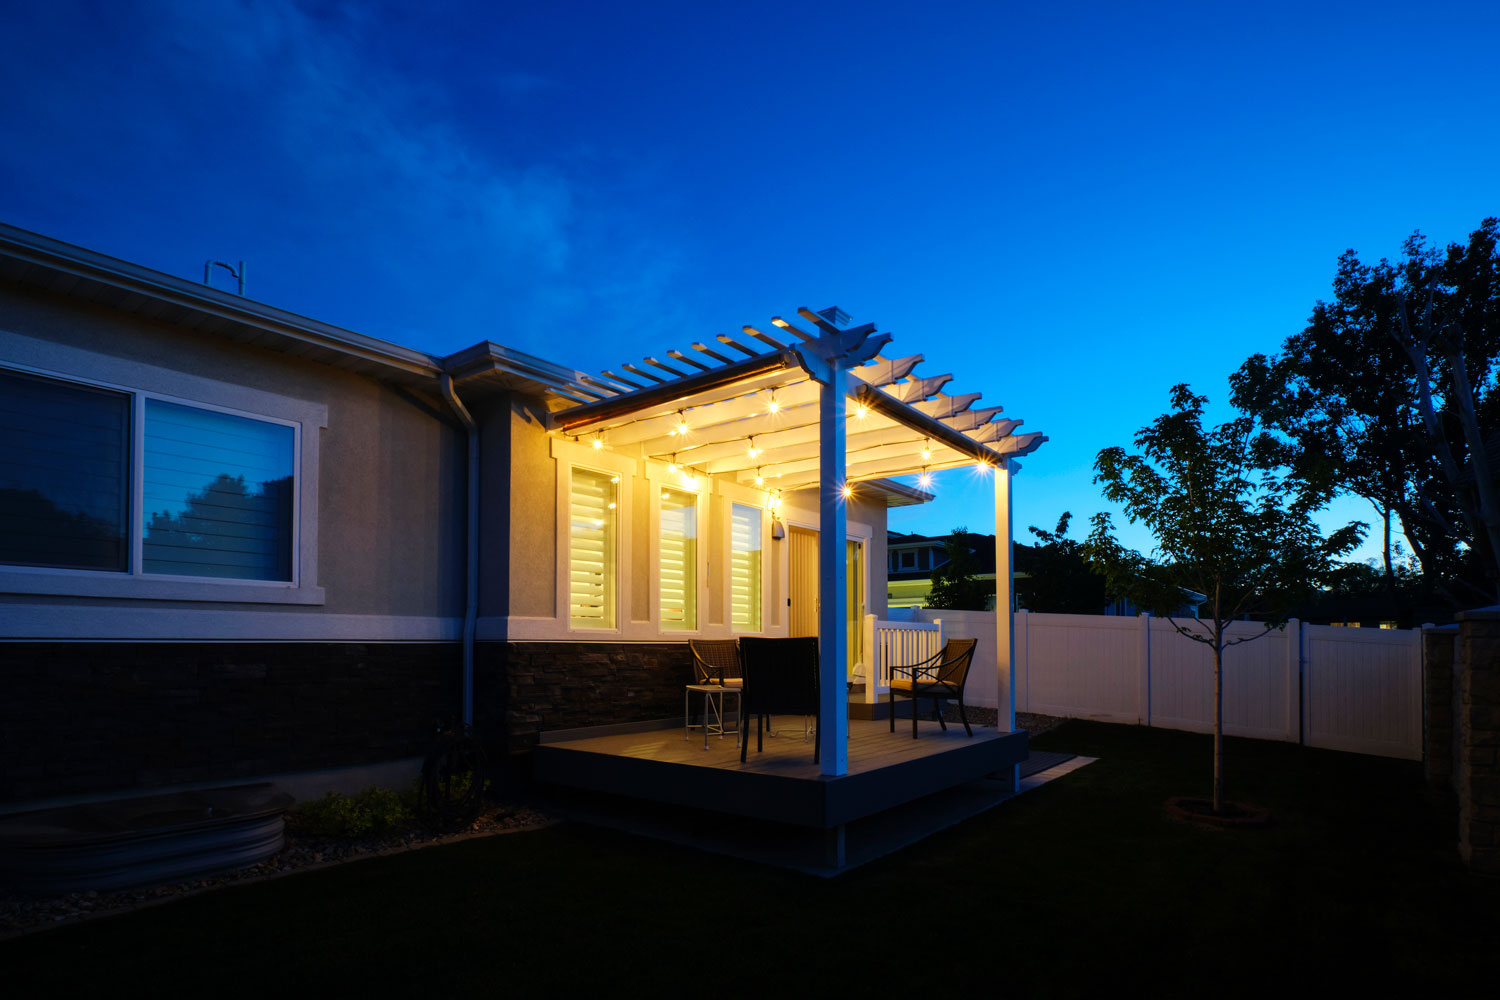 A porch with gorgeous trellis and ceiling lights left turned on